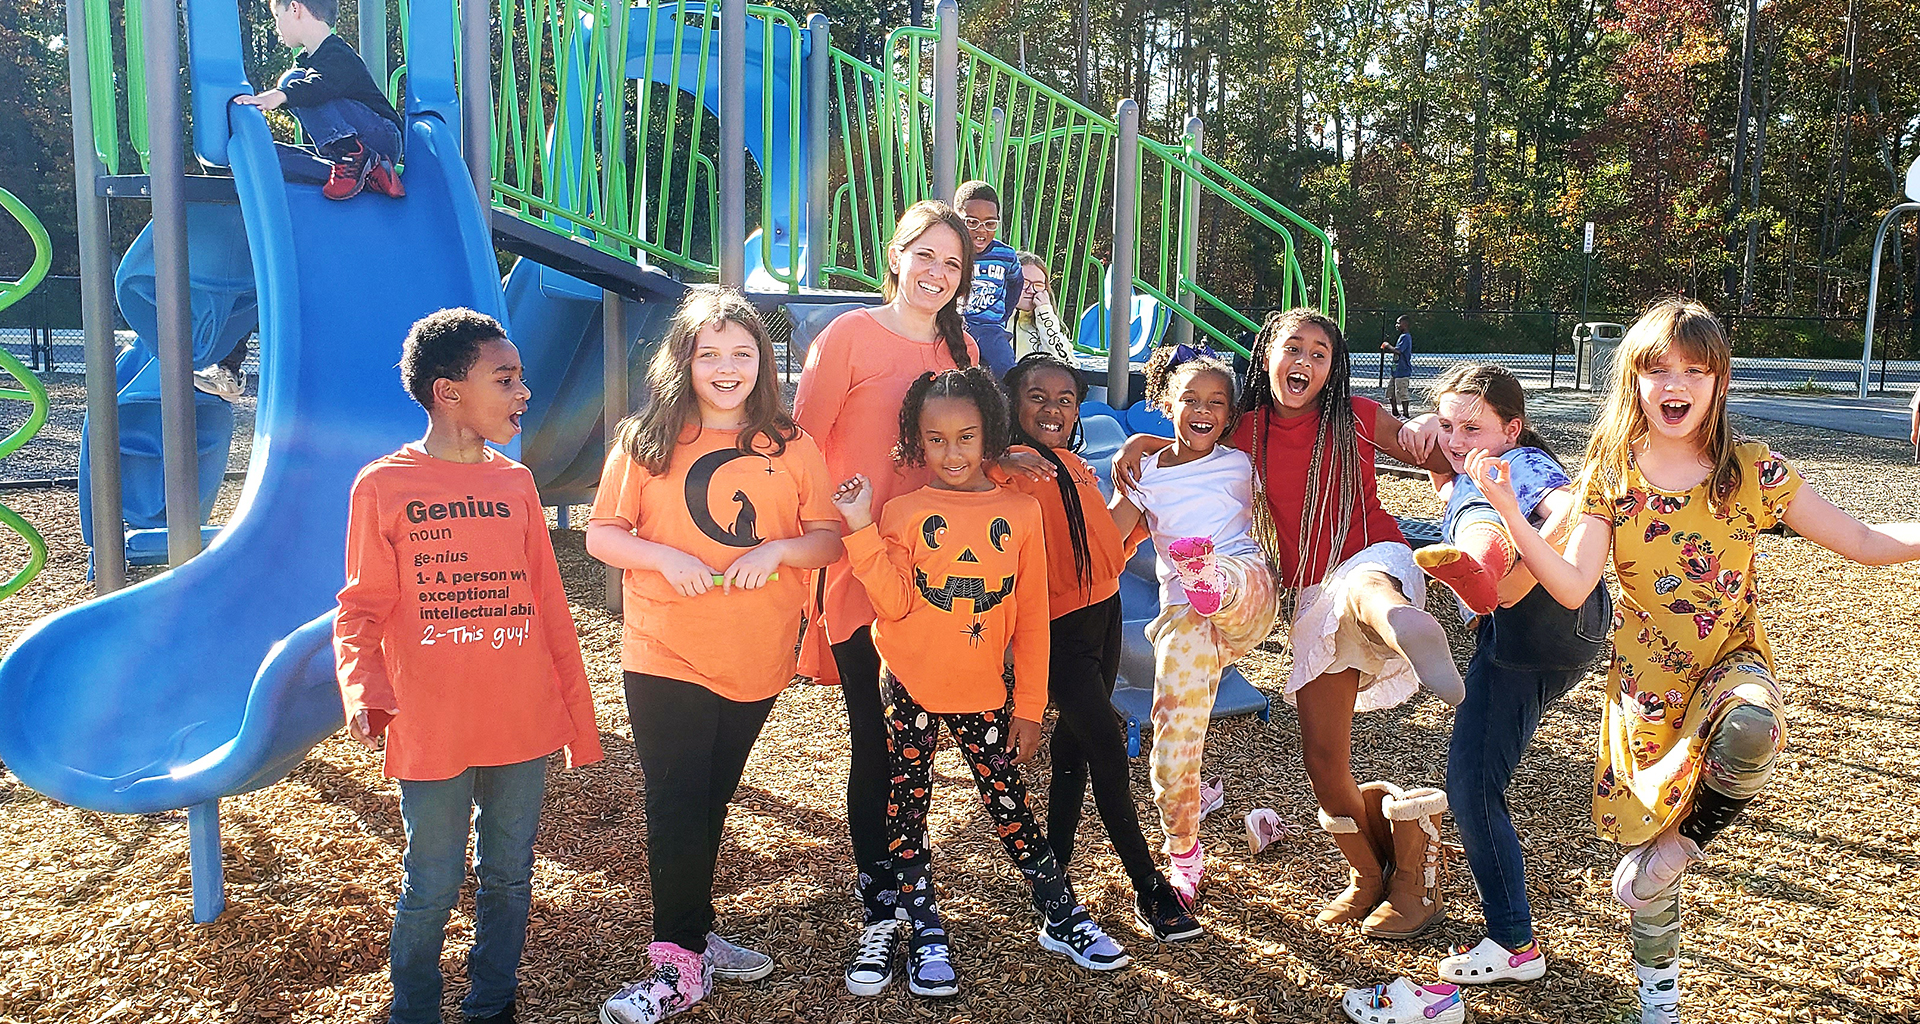 Group of students pose in a silly manner on the playground.